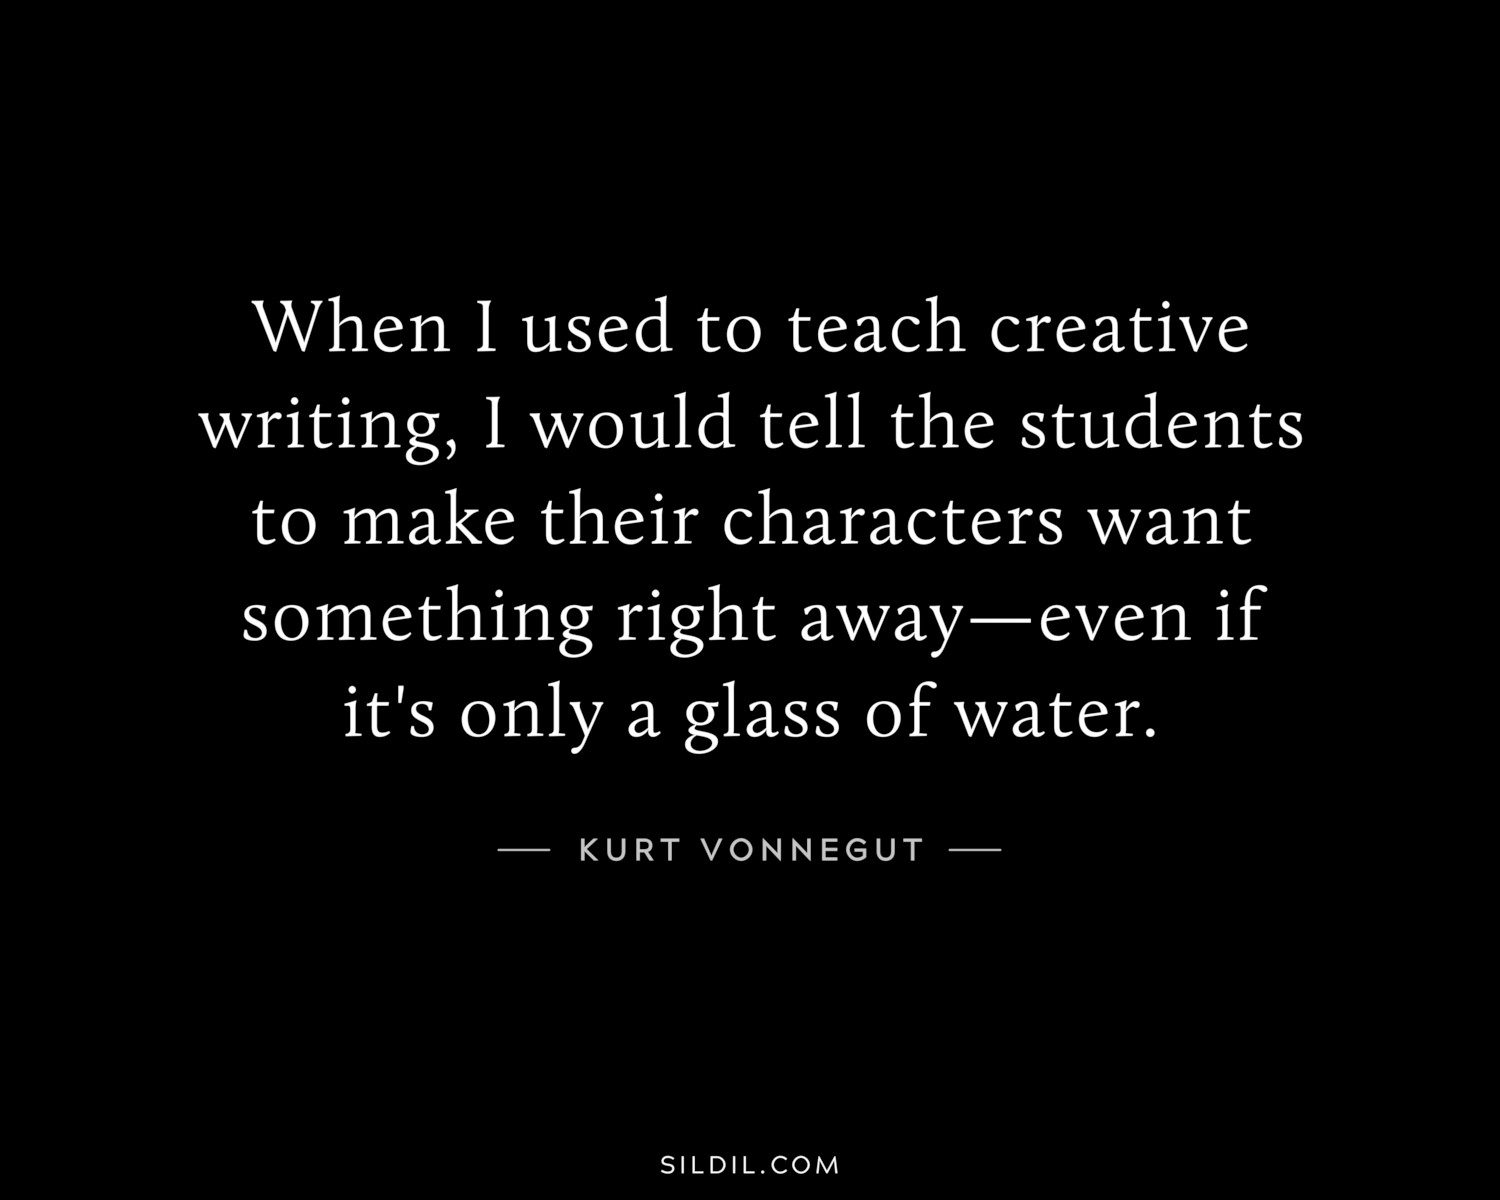 When I used to teach creative writing, I would tell the students to make their characters want something right away—even if it's only a glass of water.